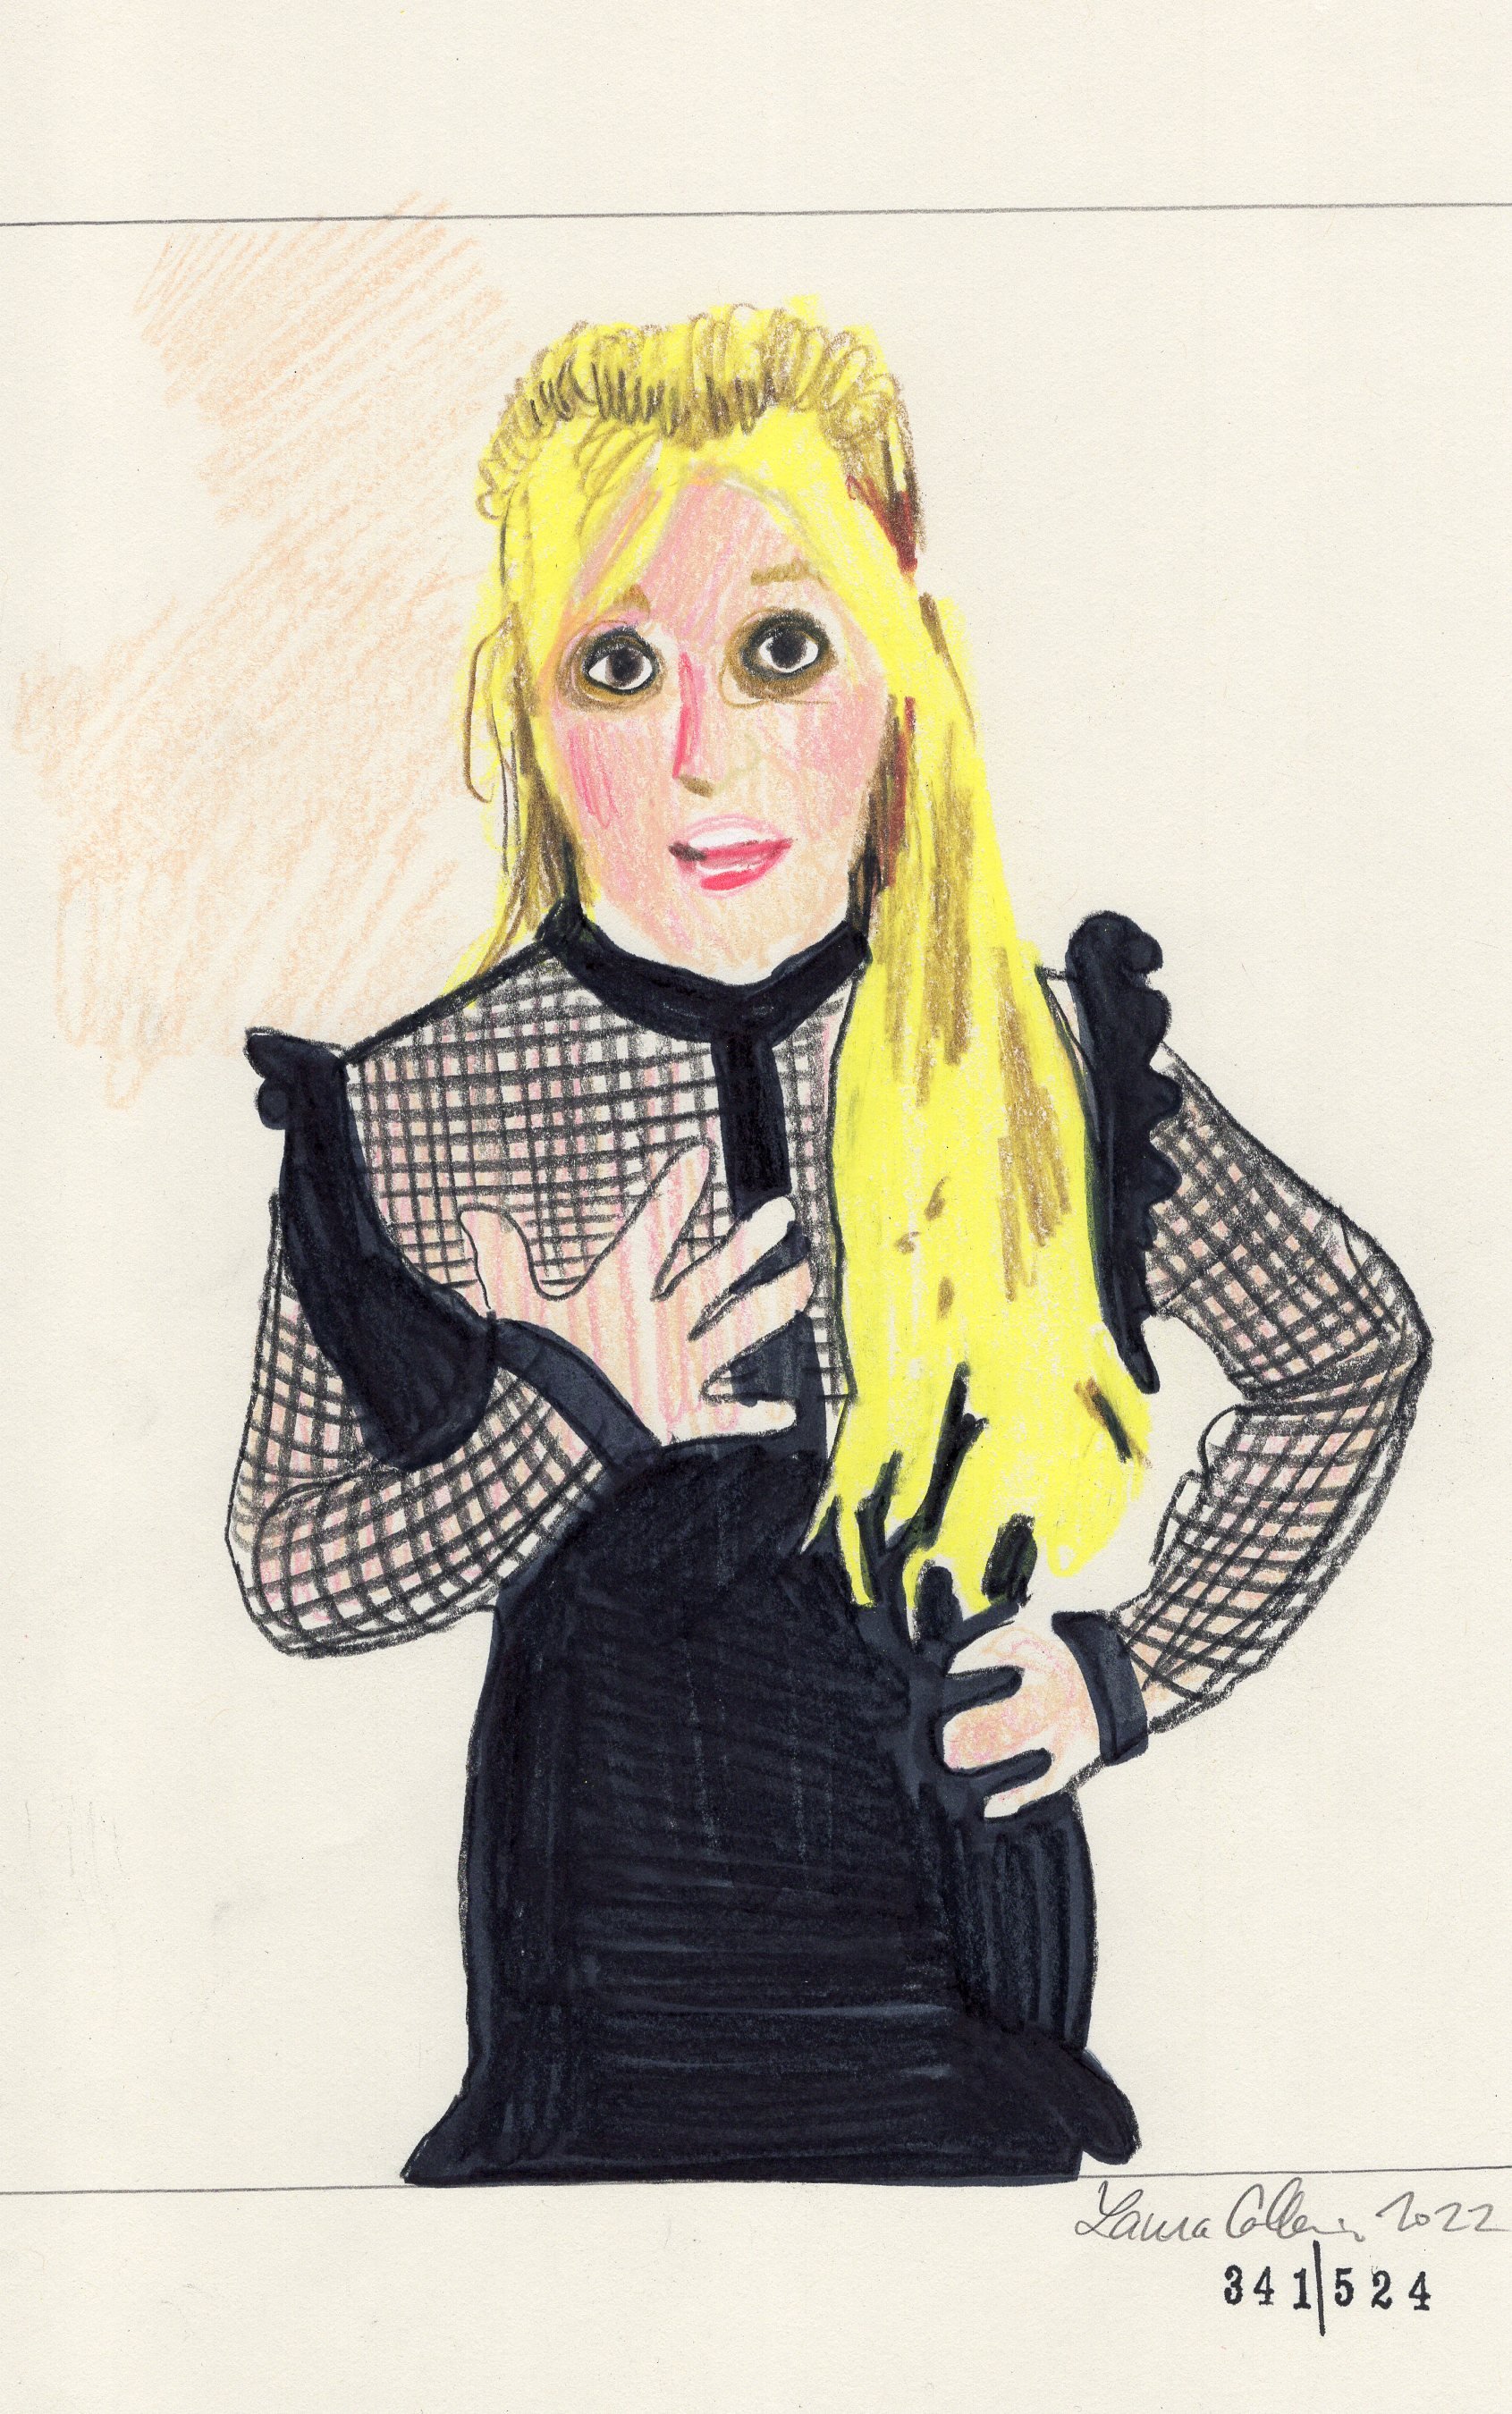 Laura Collins Britney Spears Animation 6x9in mixed media 2022 no341.jpg